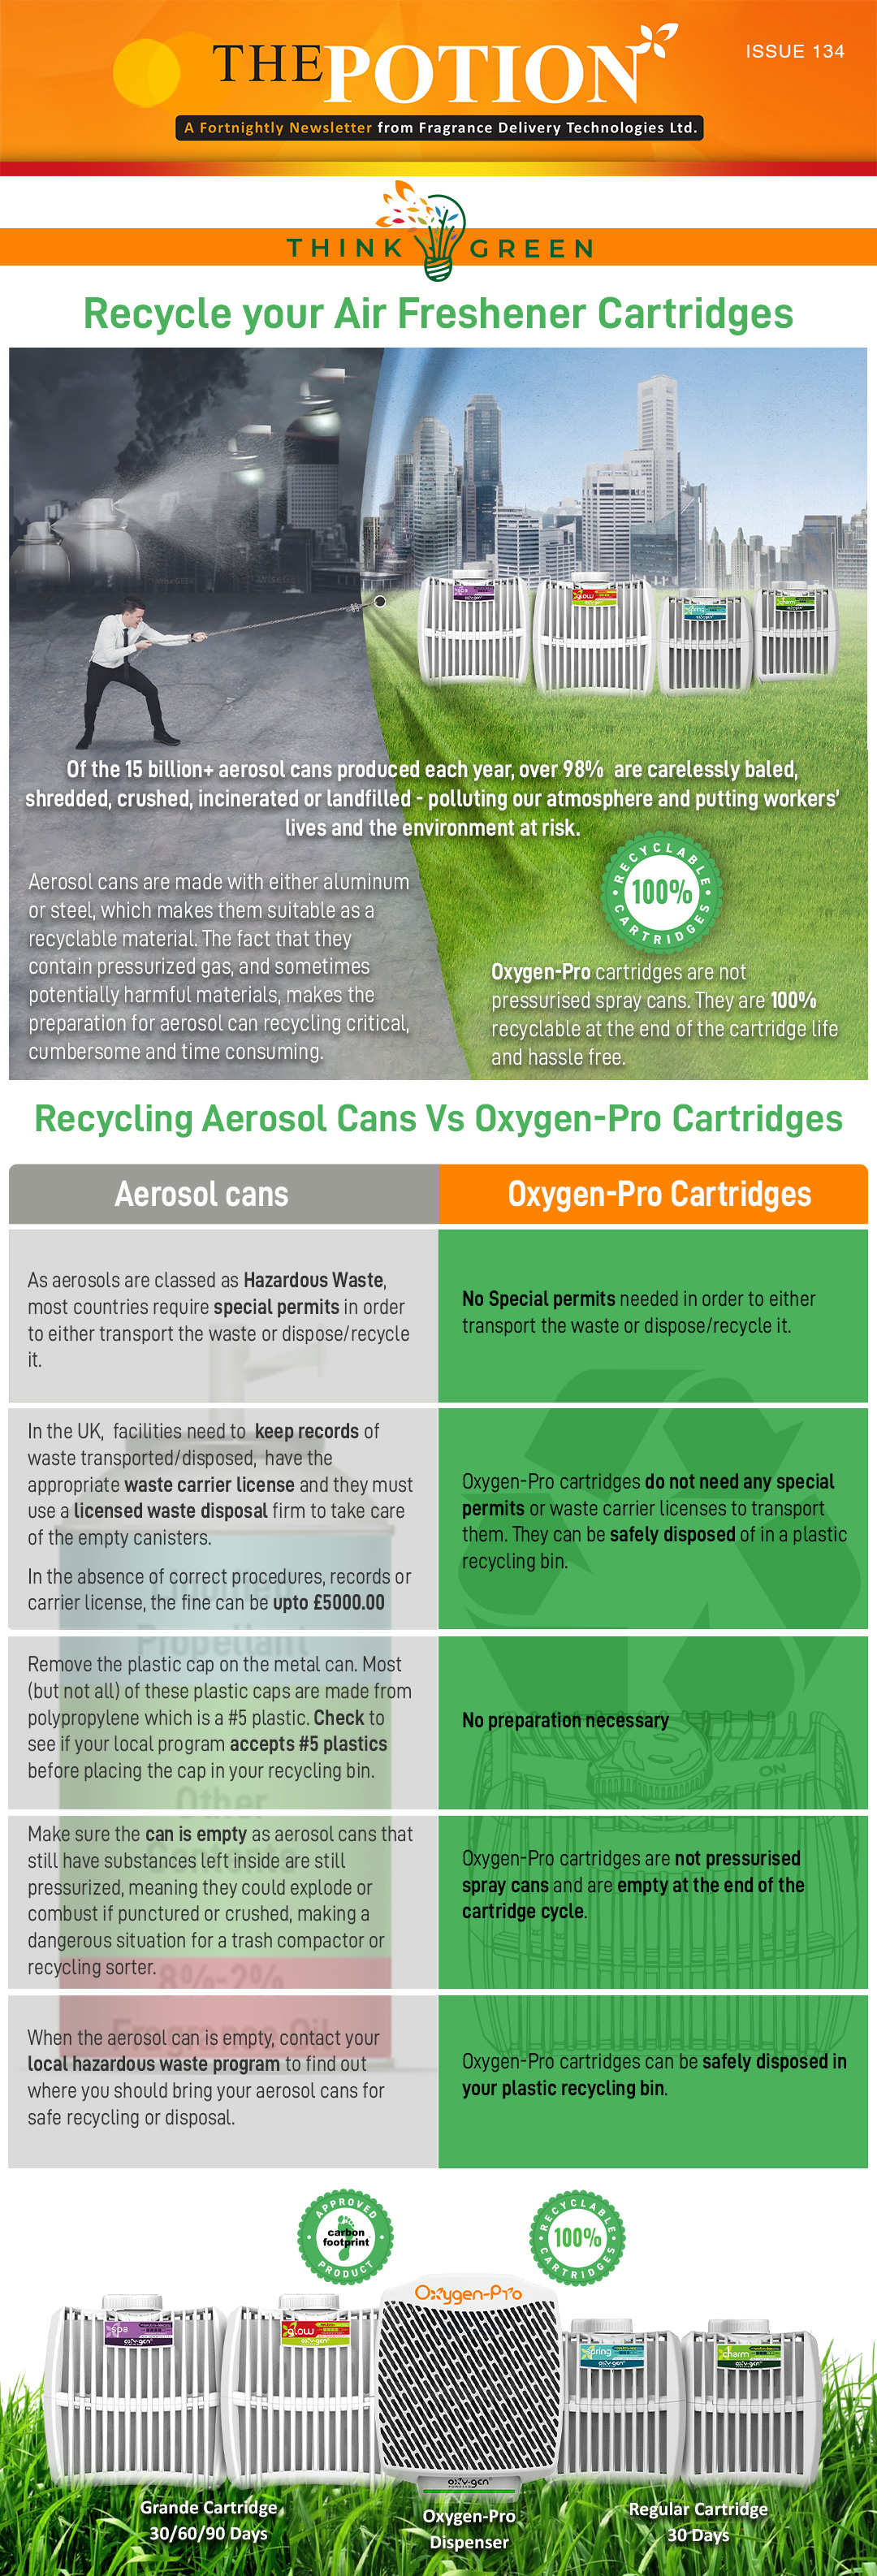 Think Green- Recycling Air Freshener Cartridges - The Potion Issue 134